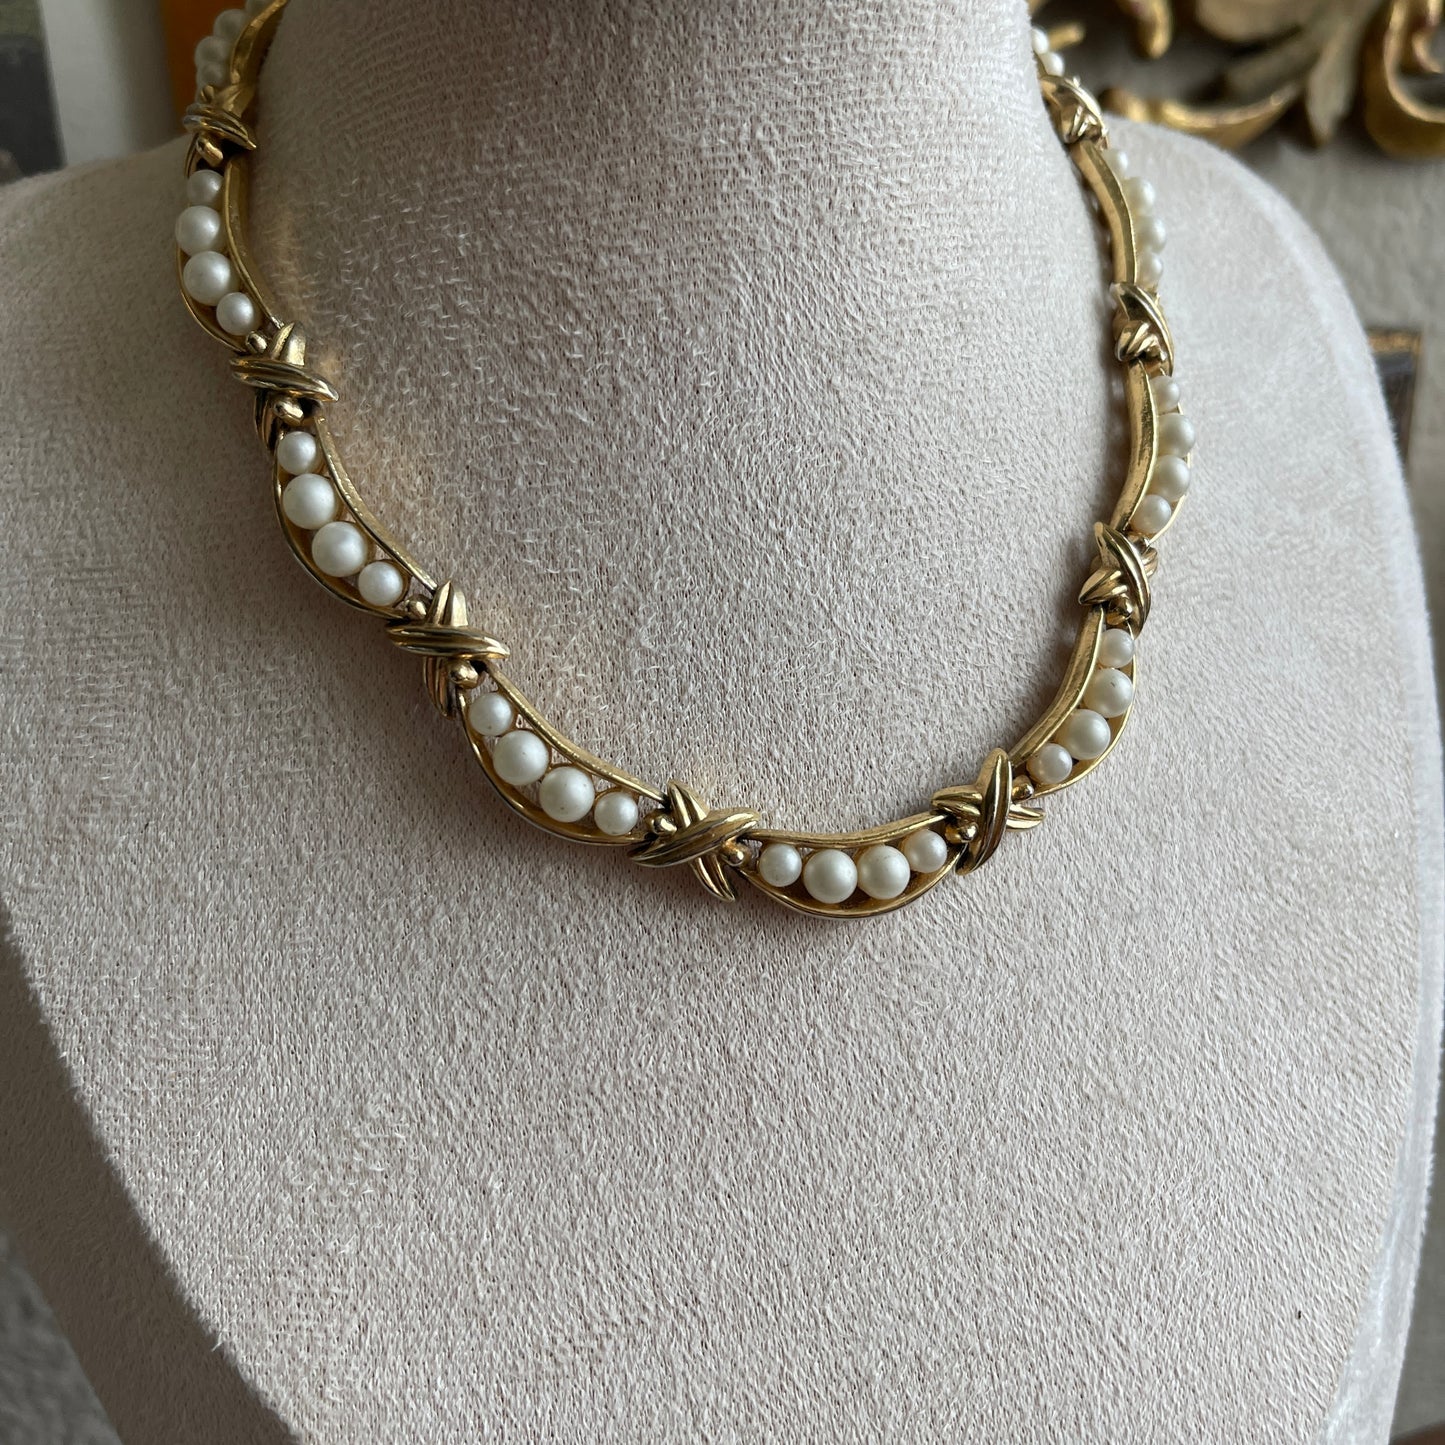 Vintage 50s TRIFARI faux pearl chocker style necklace